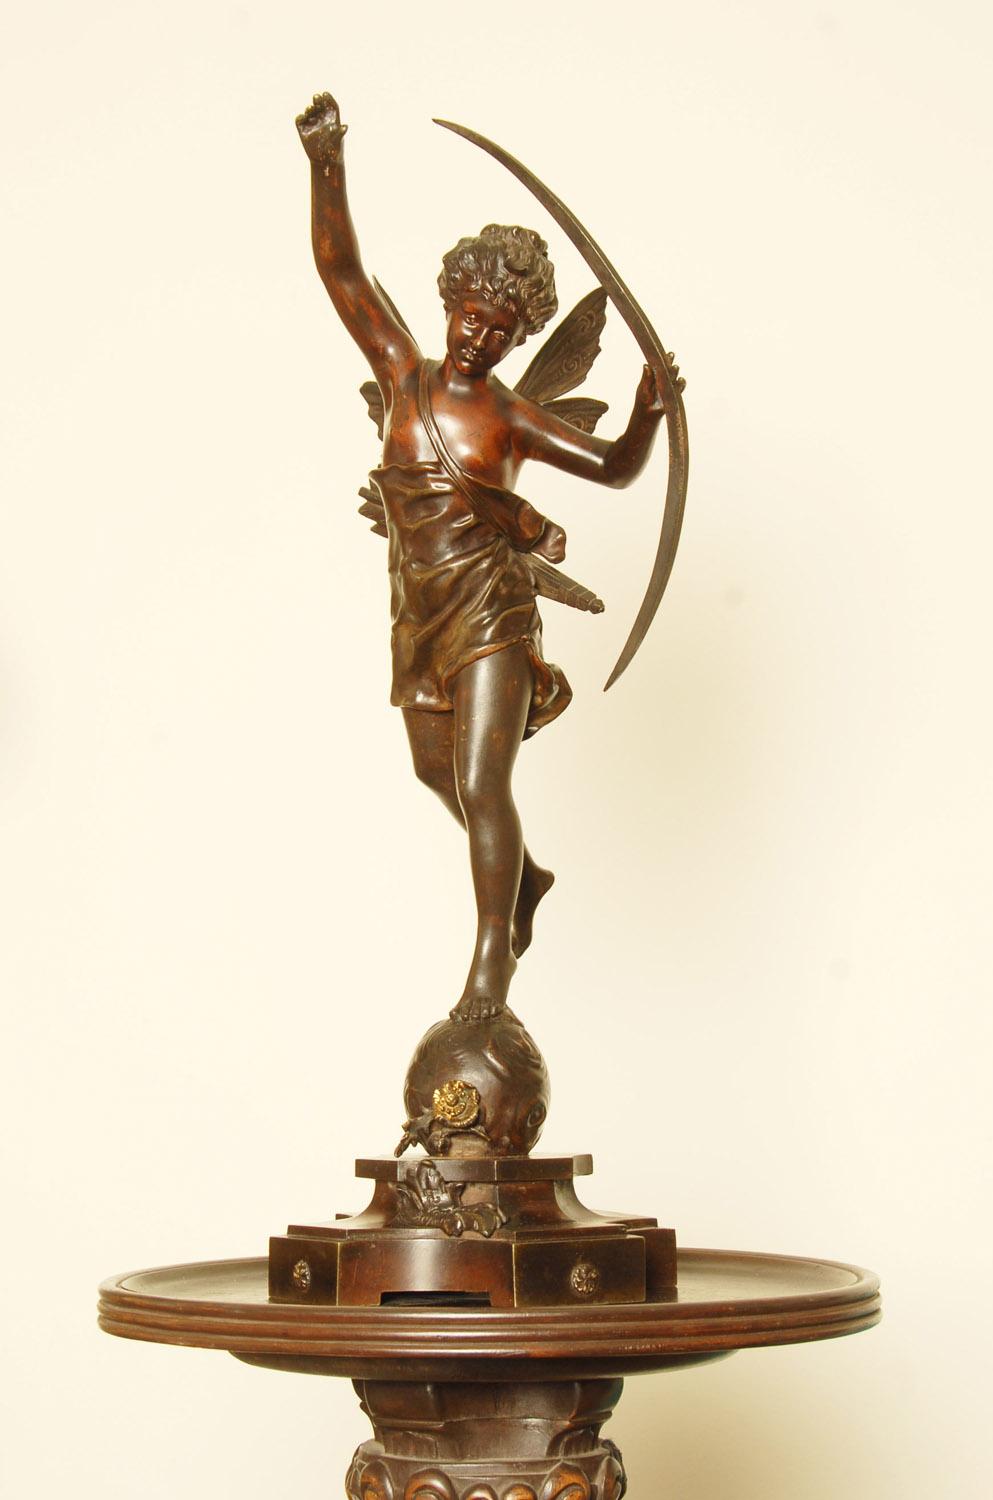 Bronze 19th century sculpture of winged cupid by Ernest Rancoulet, France.

Beautiful, romantic French sculpture in bronze signed Rancoulet.

Price includes free shipping to anywhere in the world.